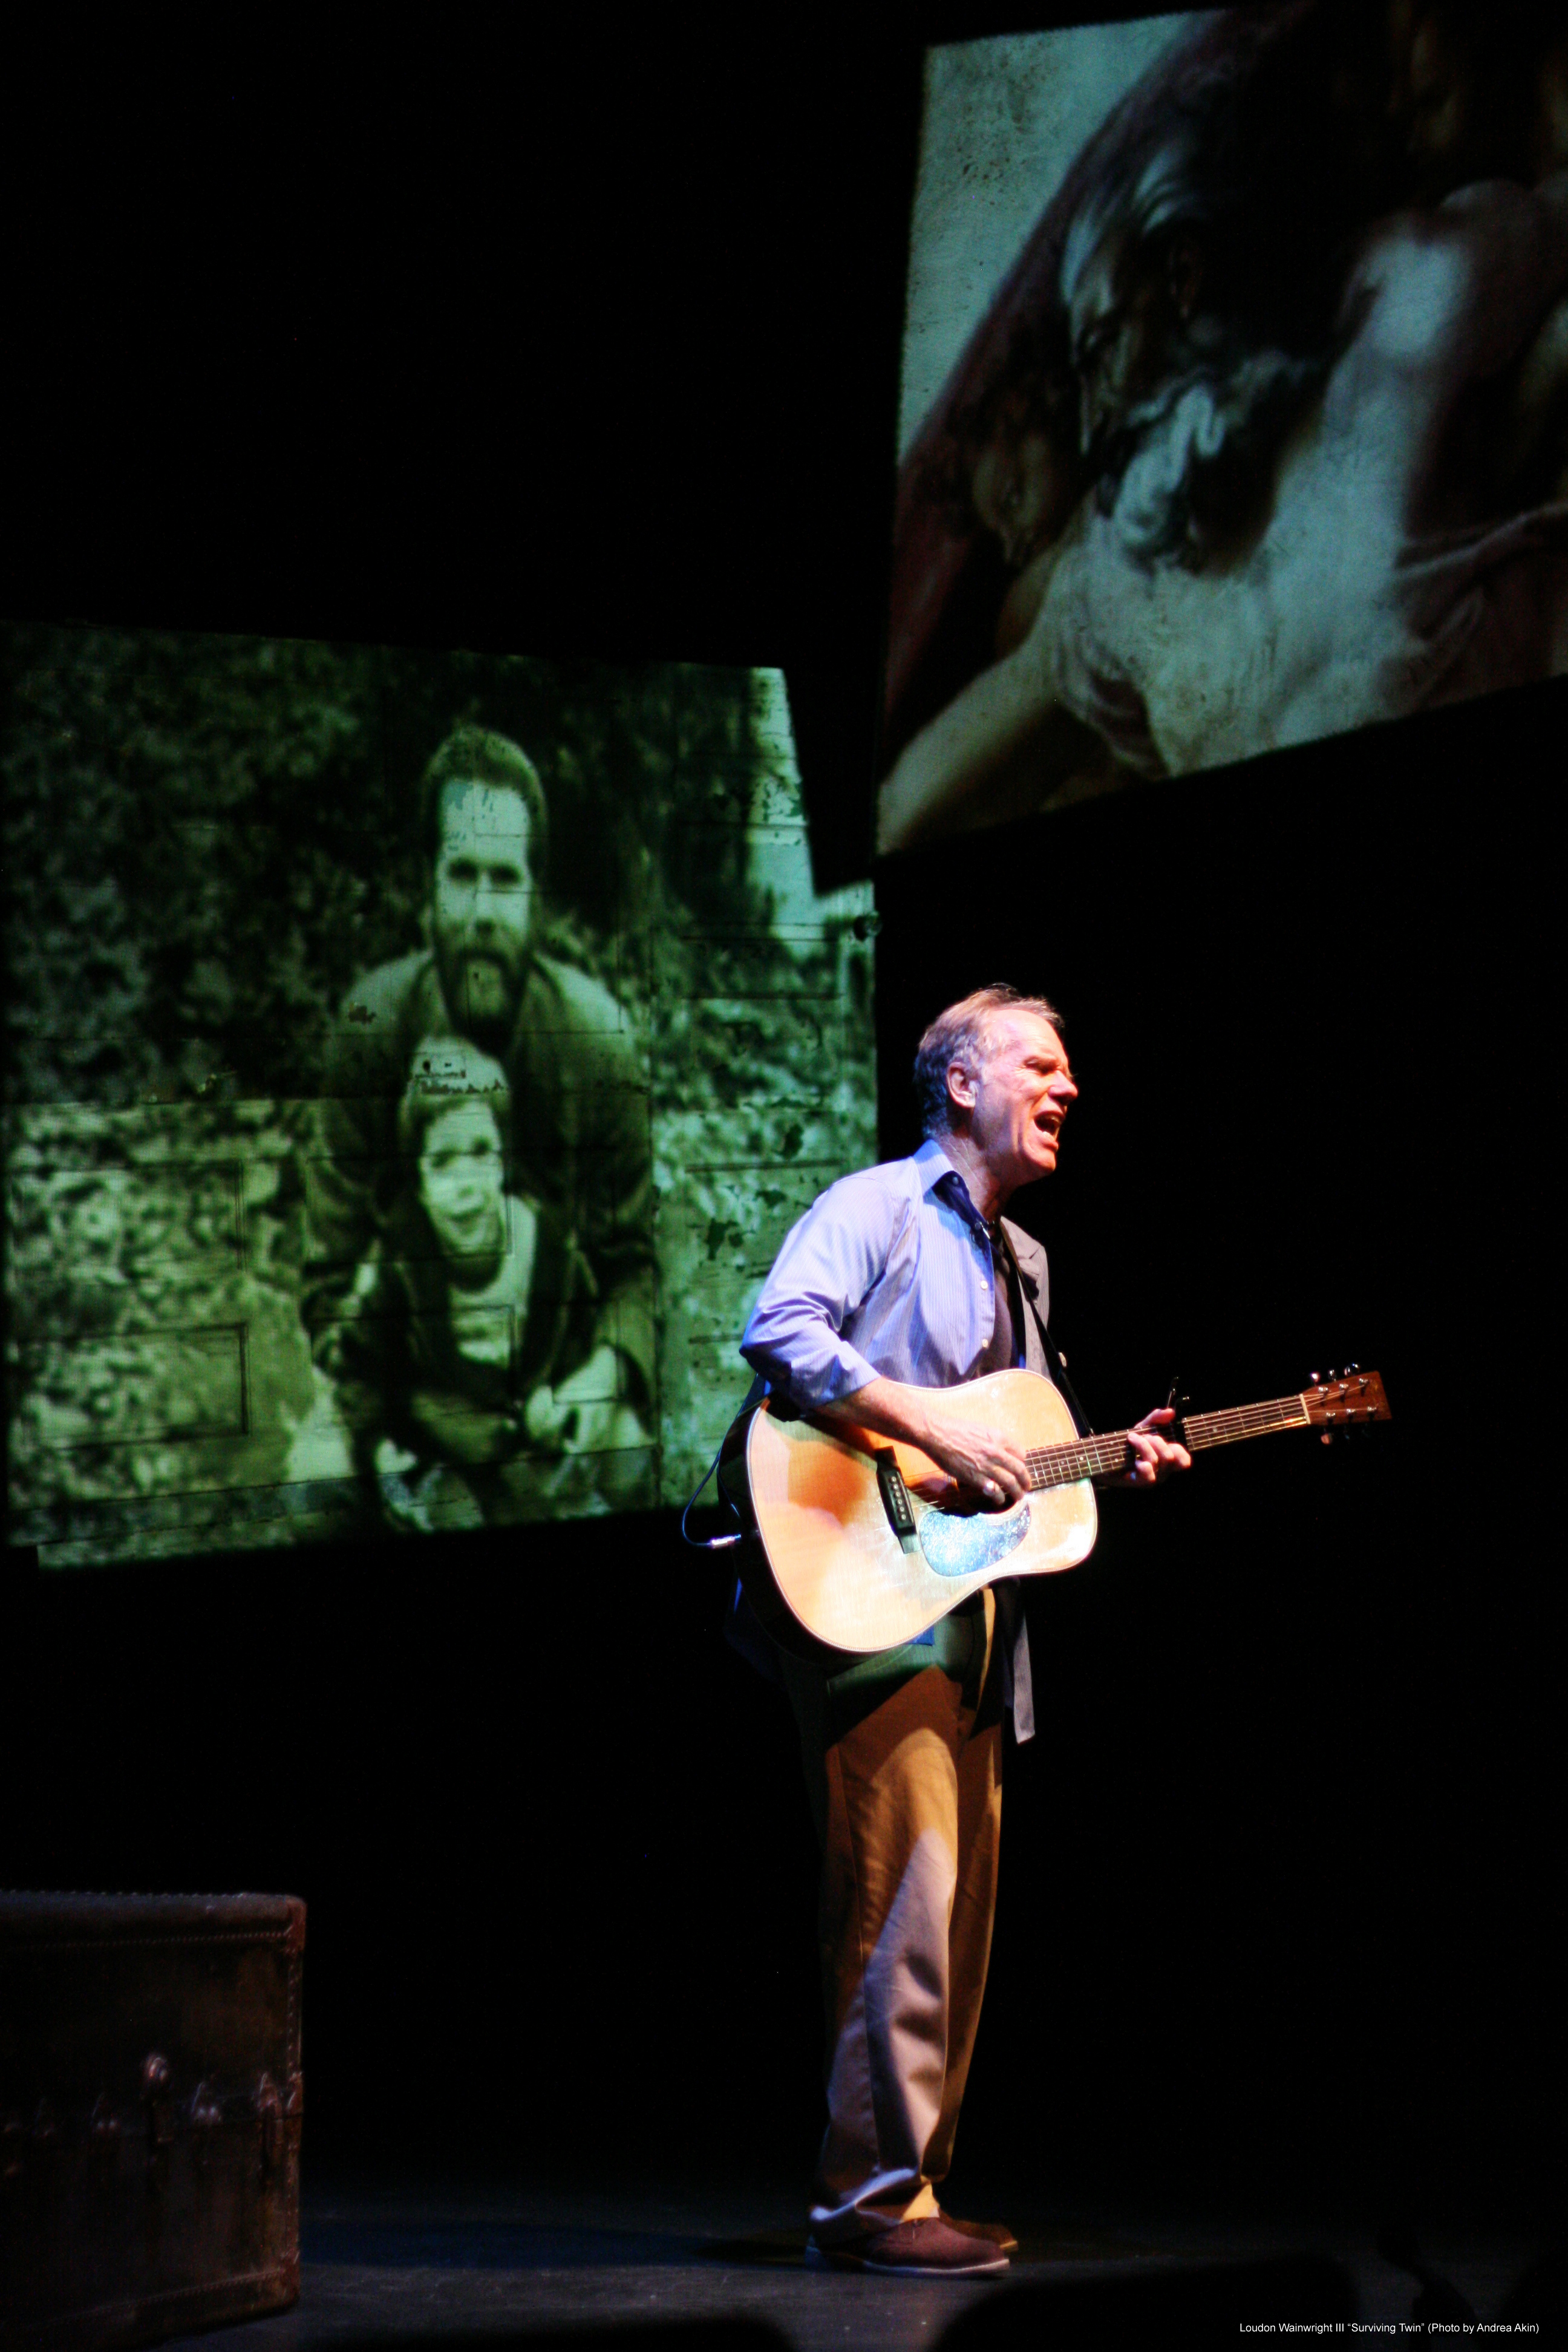 Loudon Wainwright III "Surviving Twin" - Publicity Images